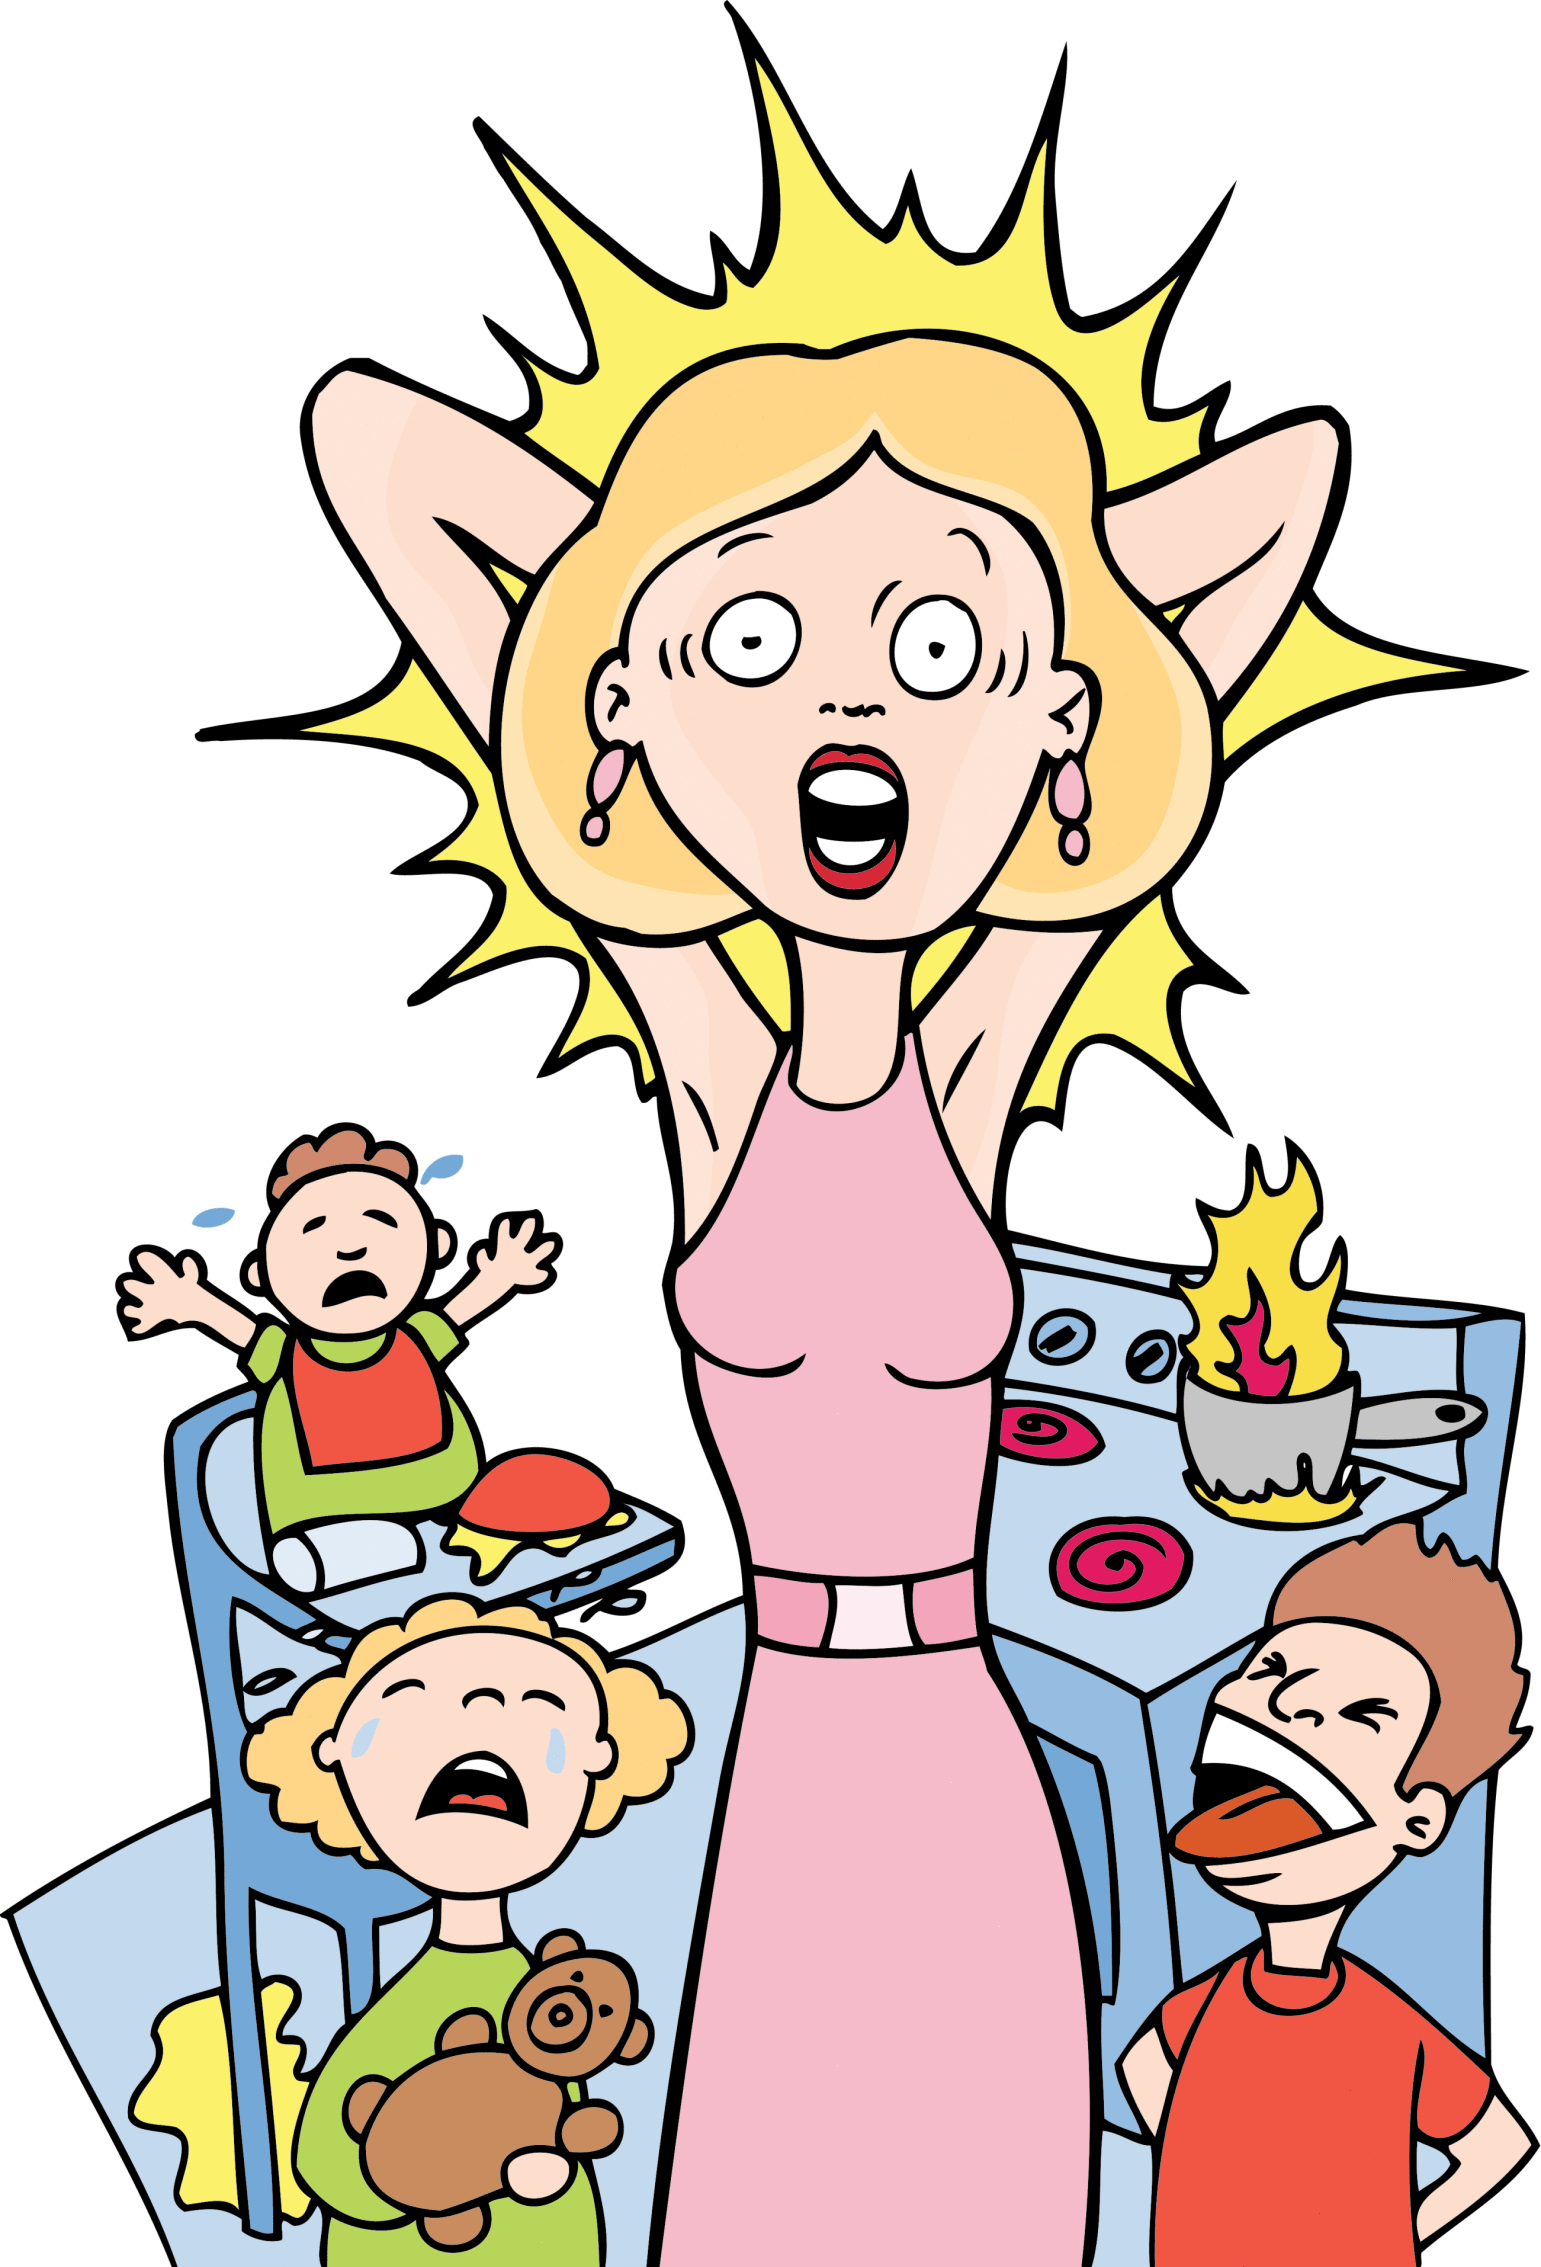 Clip Arts Related To : mom and baby cartoon png. view all cartoon-mom-clipa...